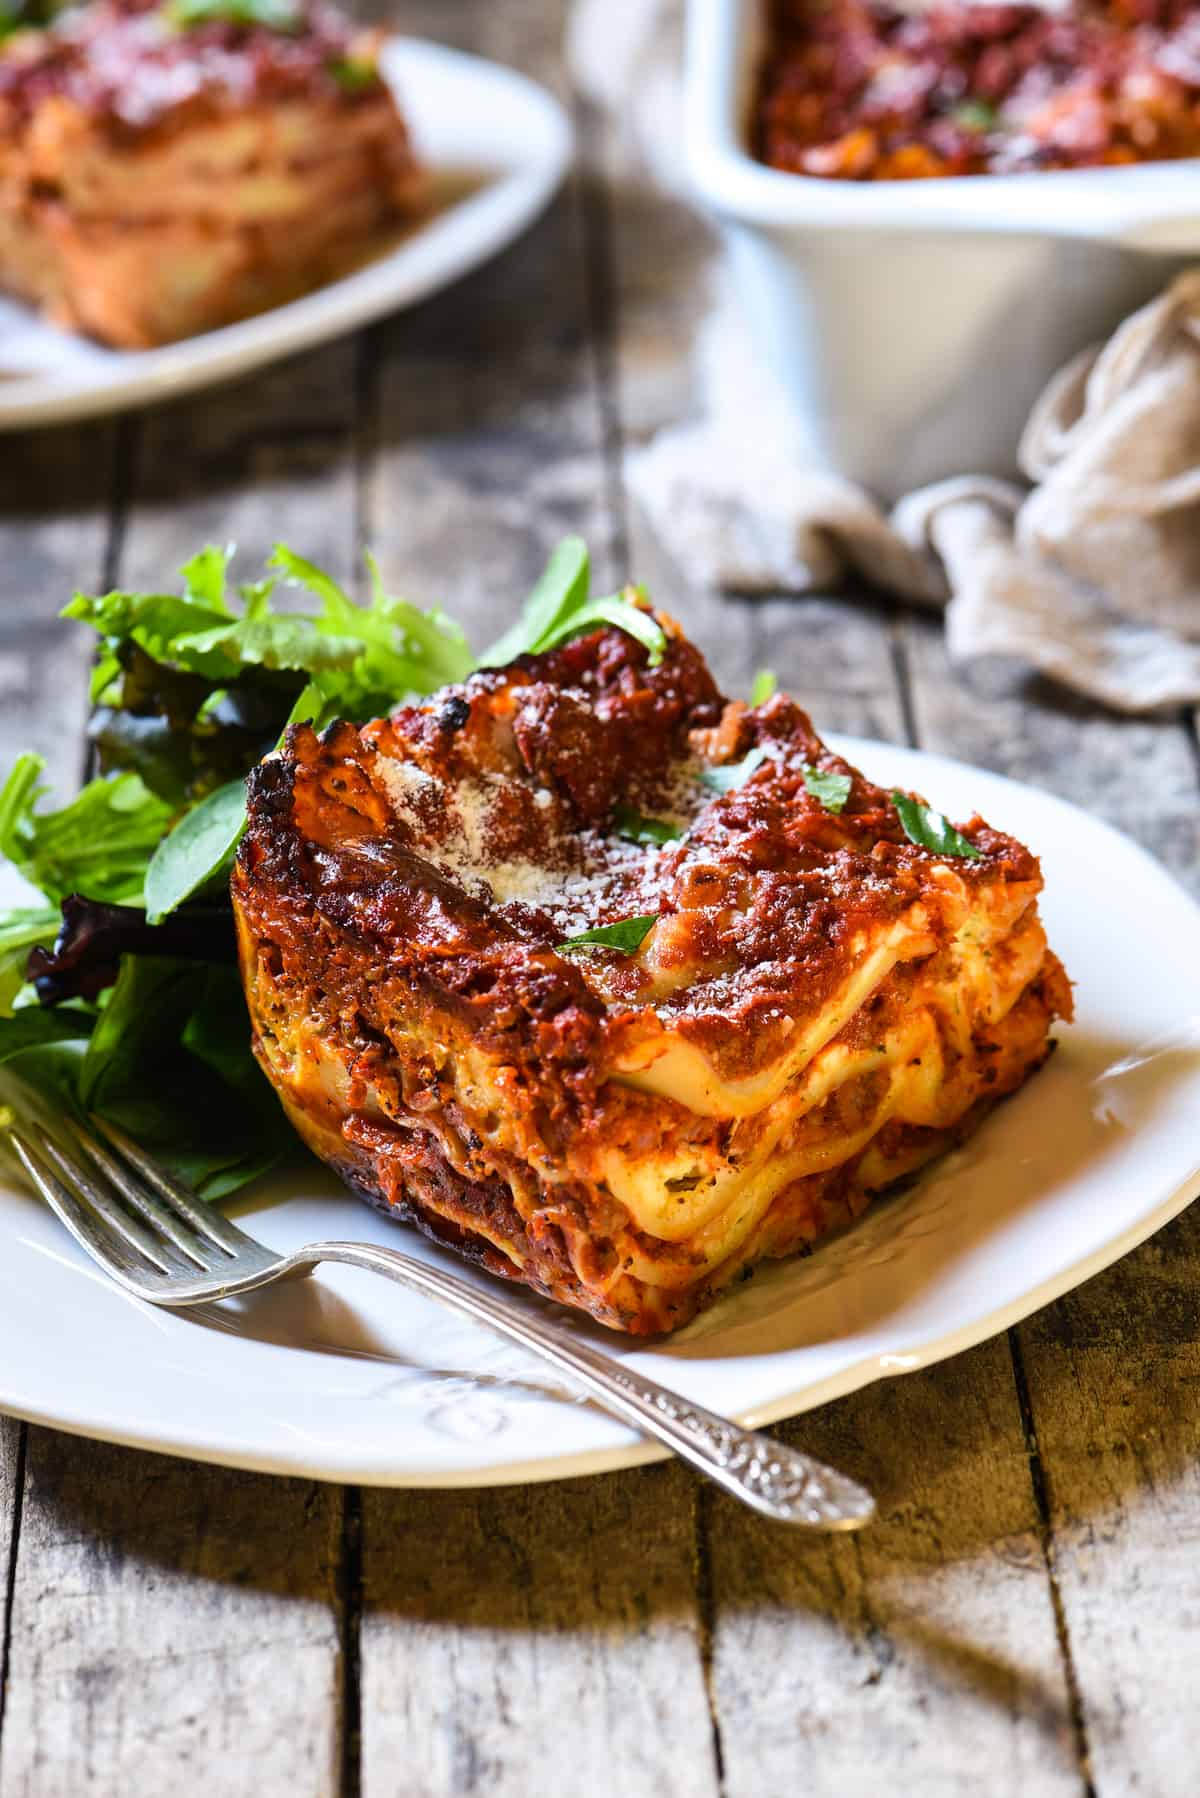 Piece of lasagna recipe with cottage cheese with a side salad on a rustic white plate.